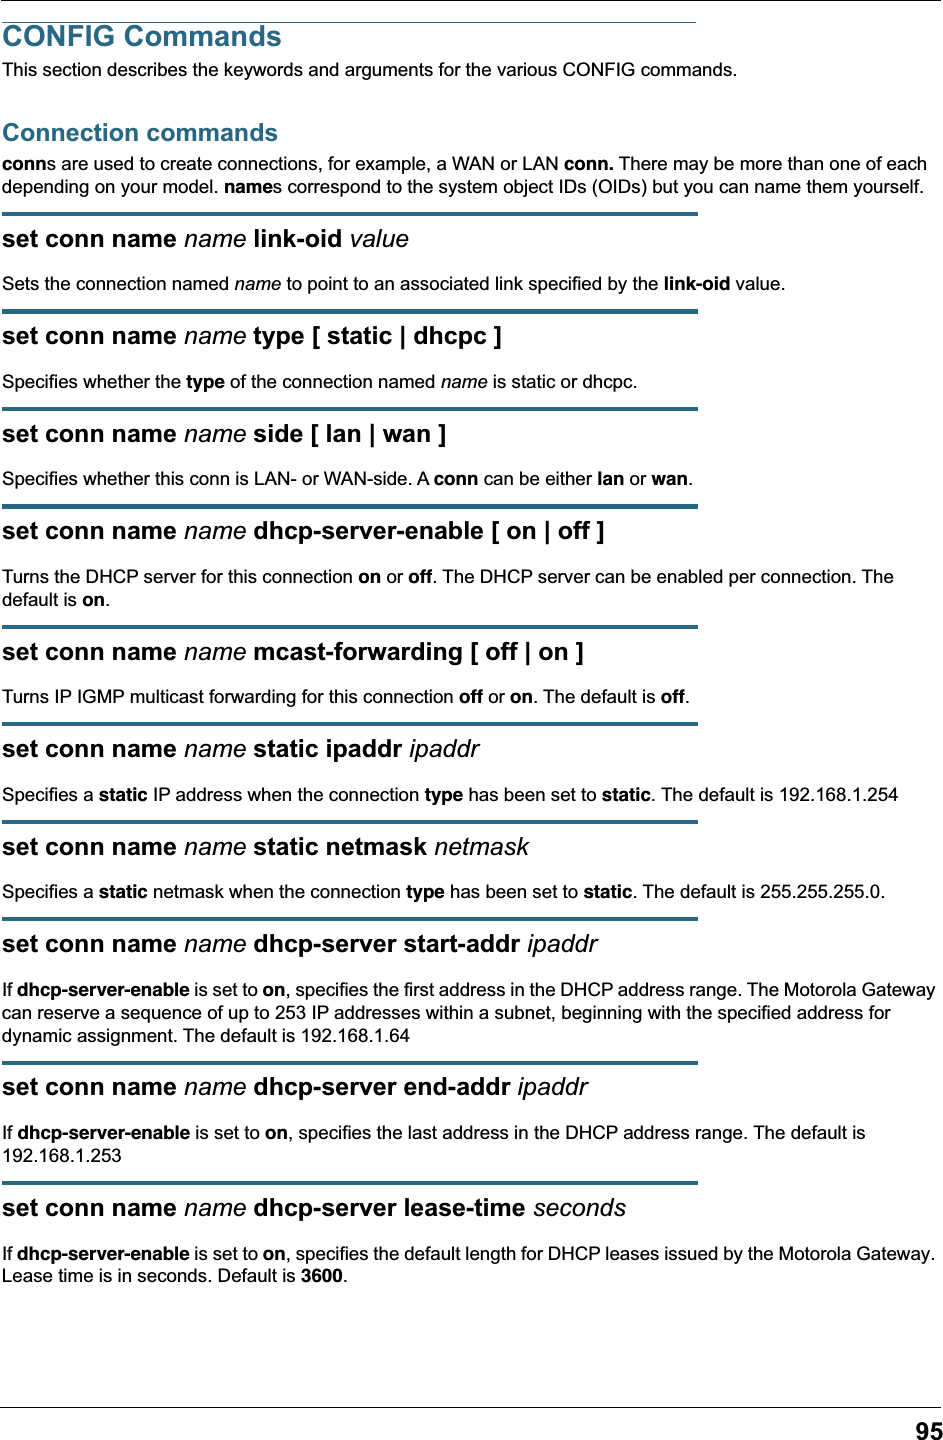 95CONFIG CommandsThis section describes the keywords and arguments for the various CONFIG commands.Connection commandsconns are used to create connections, for example, a WAN or LAN conn. There may be more than one of each depending on your model. names correspond to the system object IDs (OIDs) but you can name them yourself.set conn name name link-oid valueSets the connection named name to point to an associated link specified by the link-oid value.set conn name name type [ static | dhcpc ]Specifies whether the type of the connection named name is static or dhcpc.set conn name name side [ lan | wan ]Specifies whether this conn is LAN- or WAN-side. A conn can be either lan or wan.set conn name name dhcp-server-enable [ on | off ]Turns the DHCP server for this connection on or off. The DHCP server can be enabled per connection. The default is on.set conn name name mcast-forwarding [ off | on ]Turns IP IGMP multicast forwarding for this connection off or on. The default is off.set conn name name static ipaddr ipaddrSpecifies a static IP address when the connection type has been set to static. The default is 192.168.1.254set conn name name static netmask netmaskSpecifies a static netmask when the connection type has been set to static. The default is 255.255.255.0.set conn name name dhcp-server start-addr ipaddrIf dhcp-server-enable is set to on, specifies the first address in the DHCP address range. The Motorola Gateway can reserve a sequence of up to 253 IP addresses within a subnet, beginning with the specified address for dynamic assignment. The default is 192.168.1.64set conn name name dhcp-server end-addr ipaddrIf dhcp-server-enable is set to on, specifies the last address in the DHCP address range. The default is 192.168.1.253set conn name name dhcp-server lease-time secondsIf dhcp-server-enable is set to on, specifies the default length for DHCP leases issued by the Motorola Gateway. Lease time is in seconds. Default is 3600.